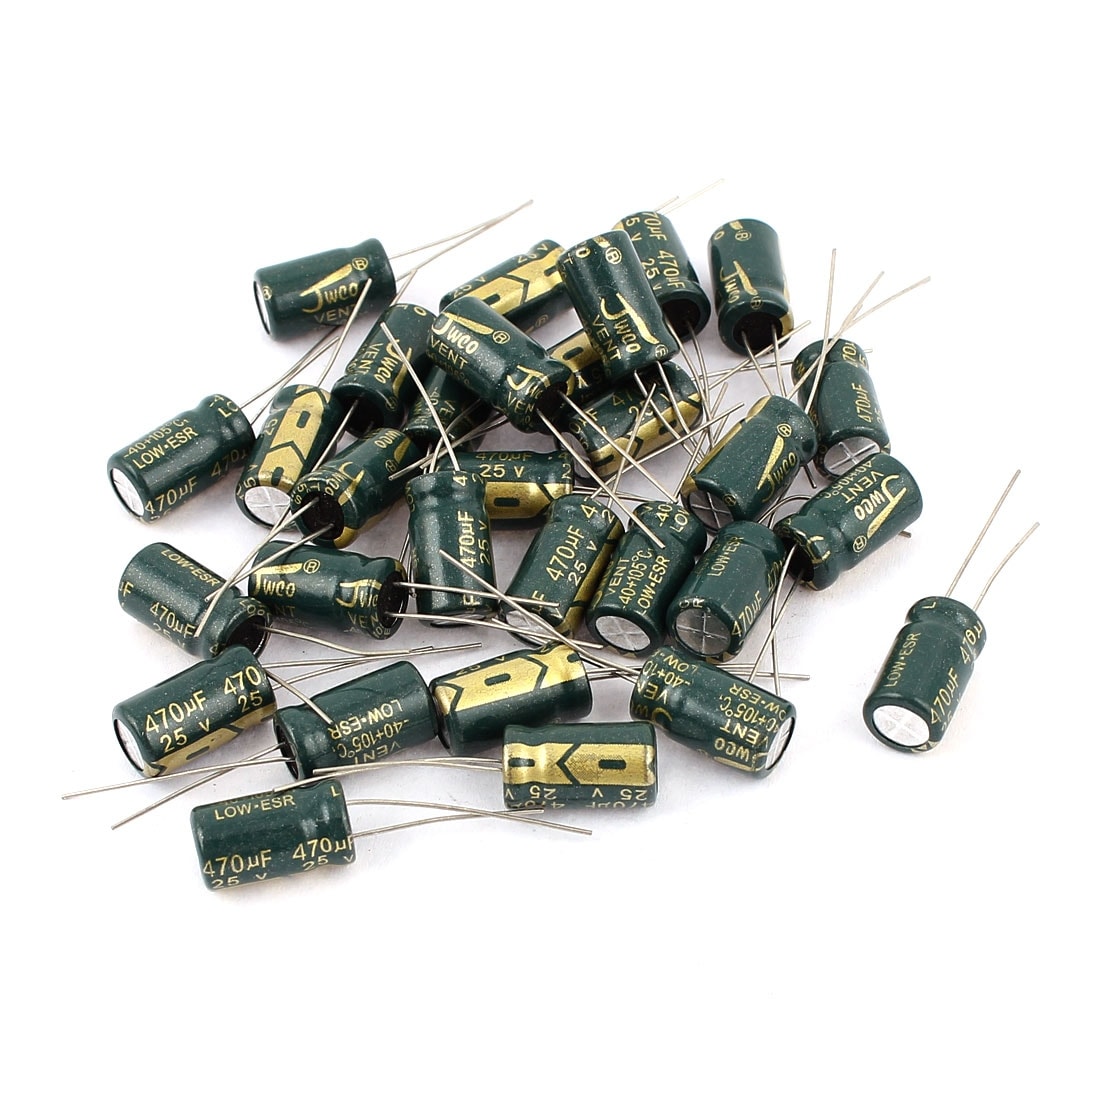 30pcs 8 x 14mm Motherboard Radial Lead Electrolytic Capacitor 105C 470uF 25V - Green, Gold Tone, Silver Tone